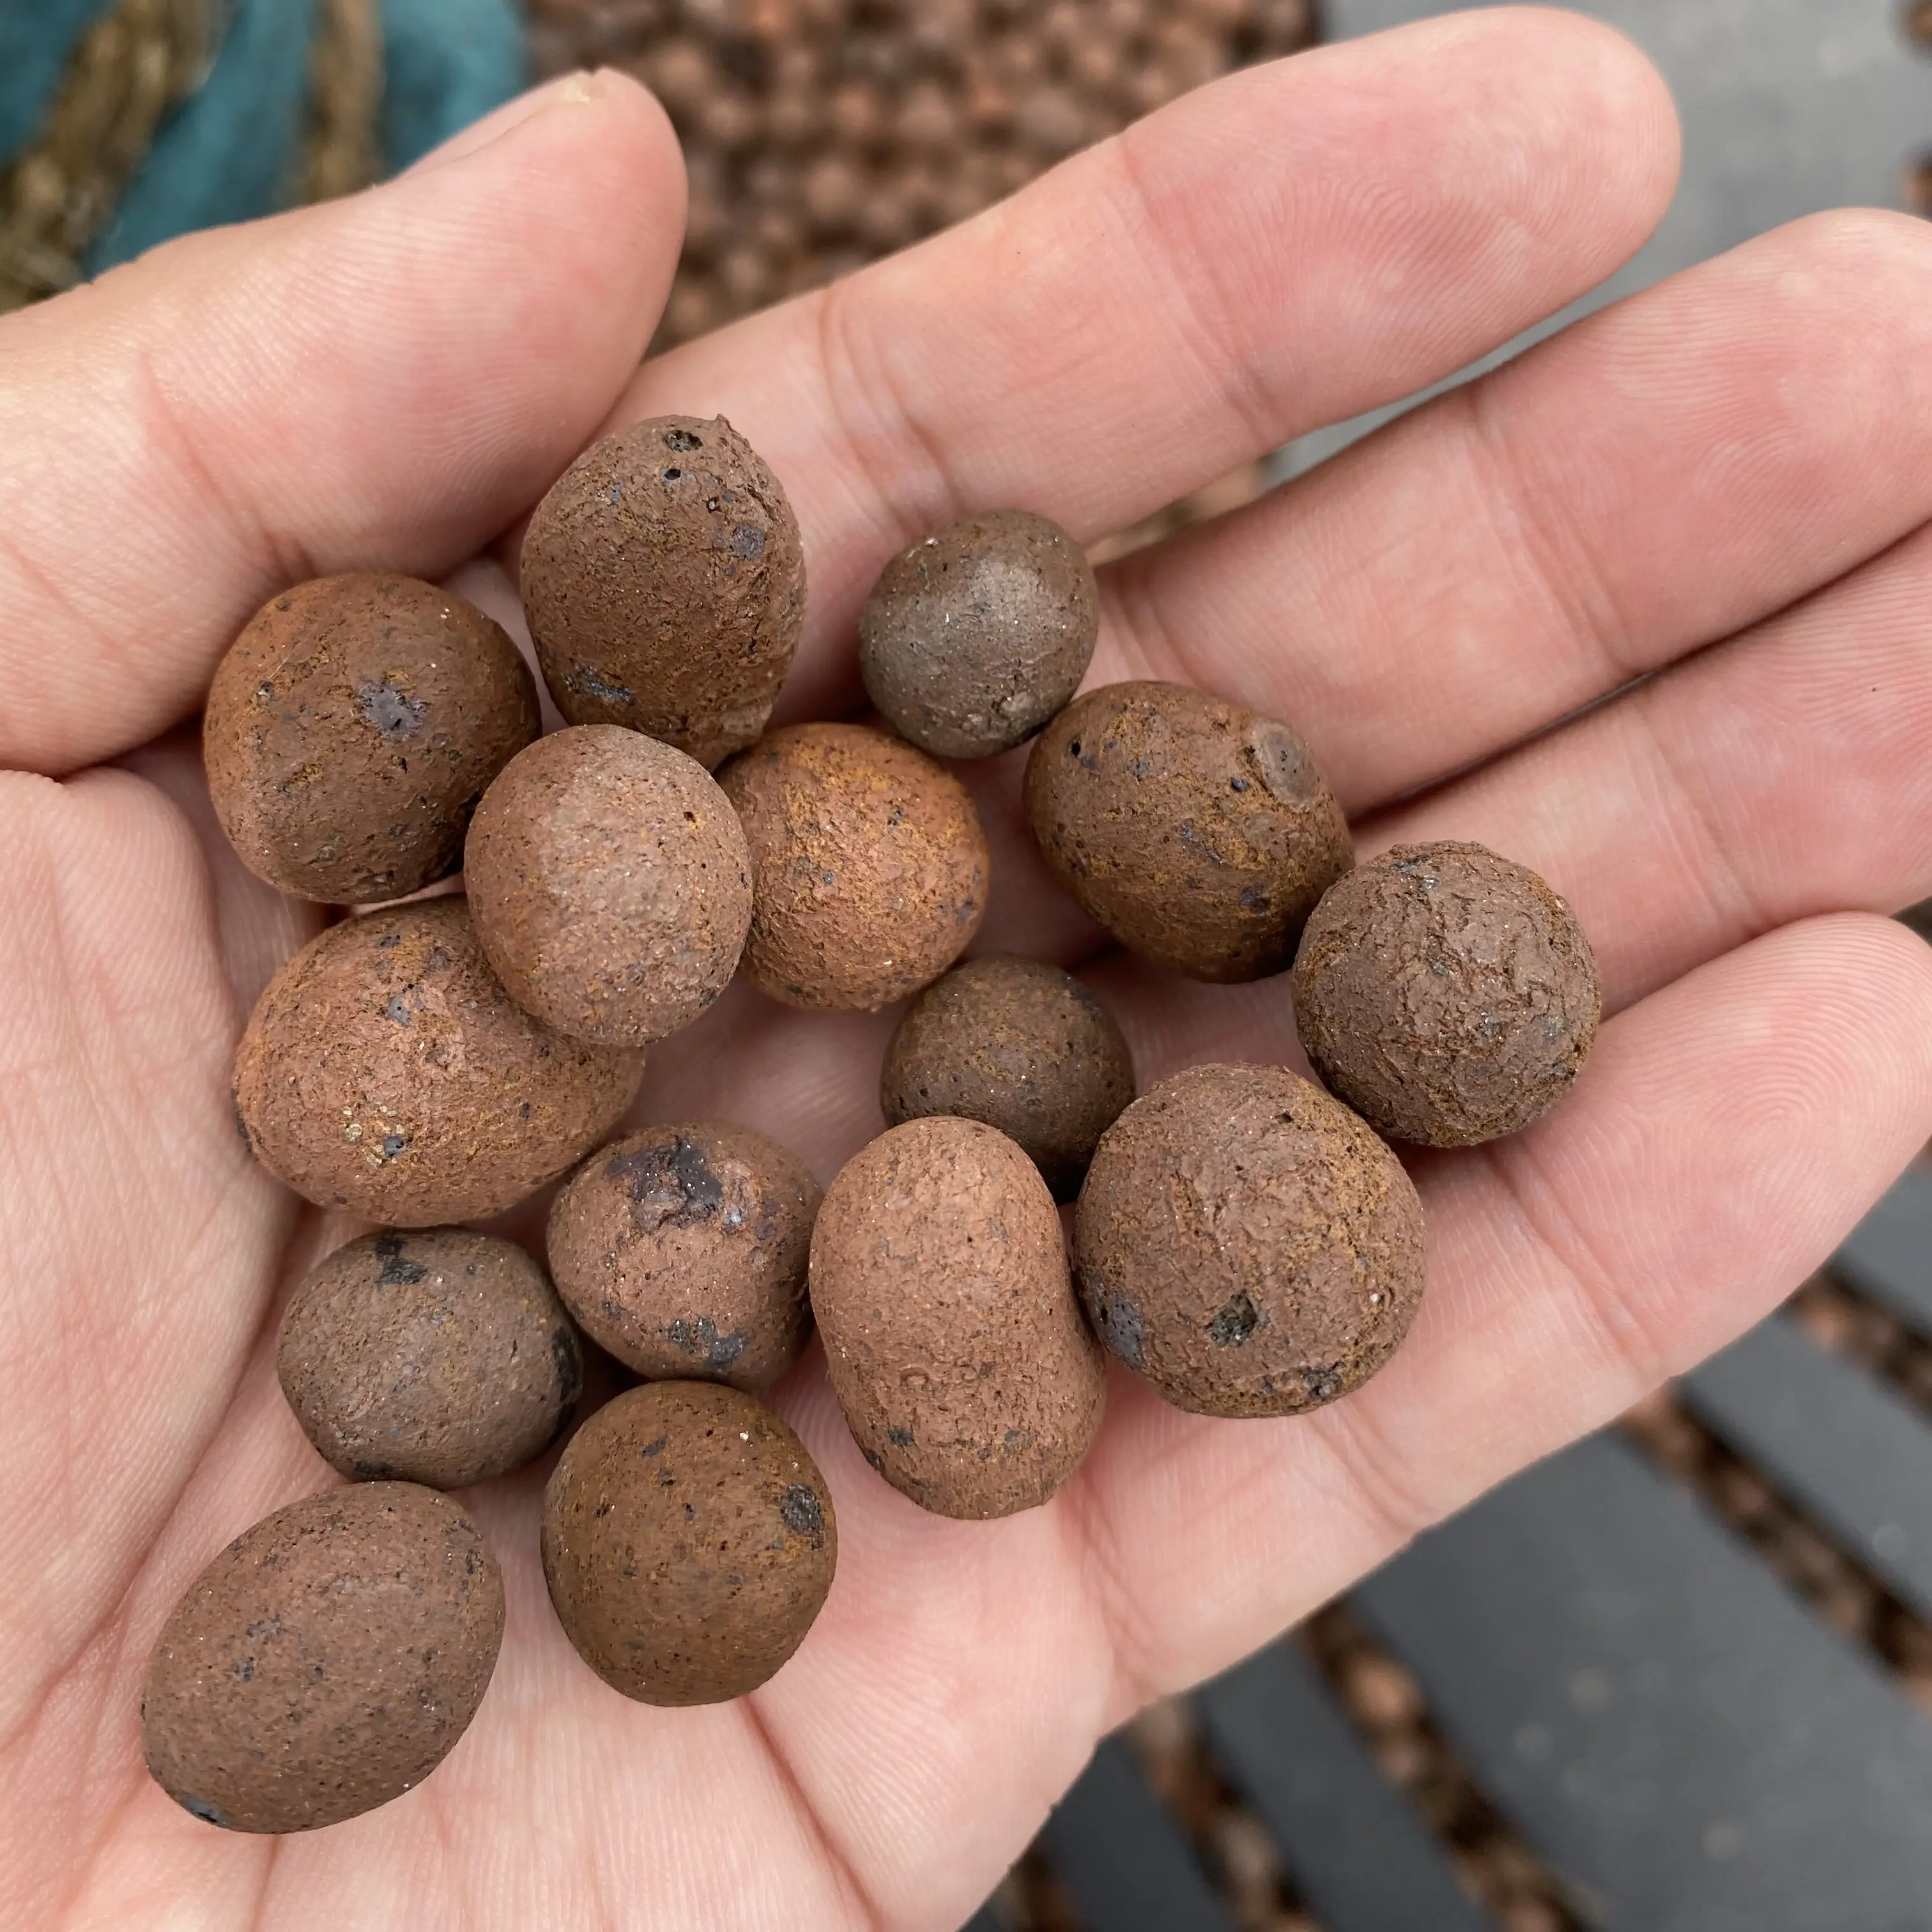 High Quality Hydro Leca Balls Ceramsite Clay Pebbles for Landscaping Garden Decorative material